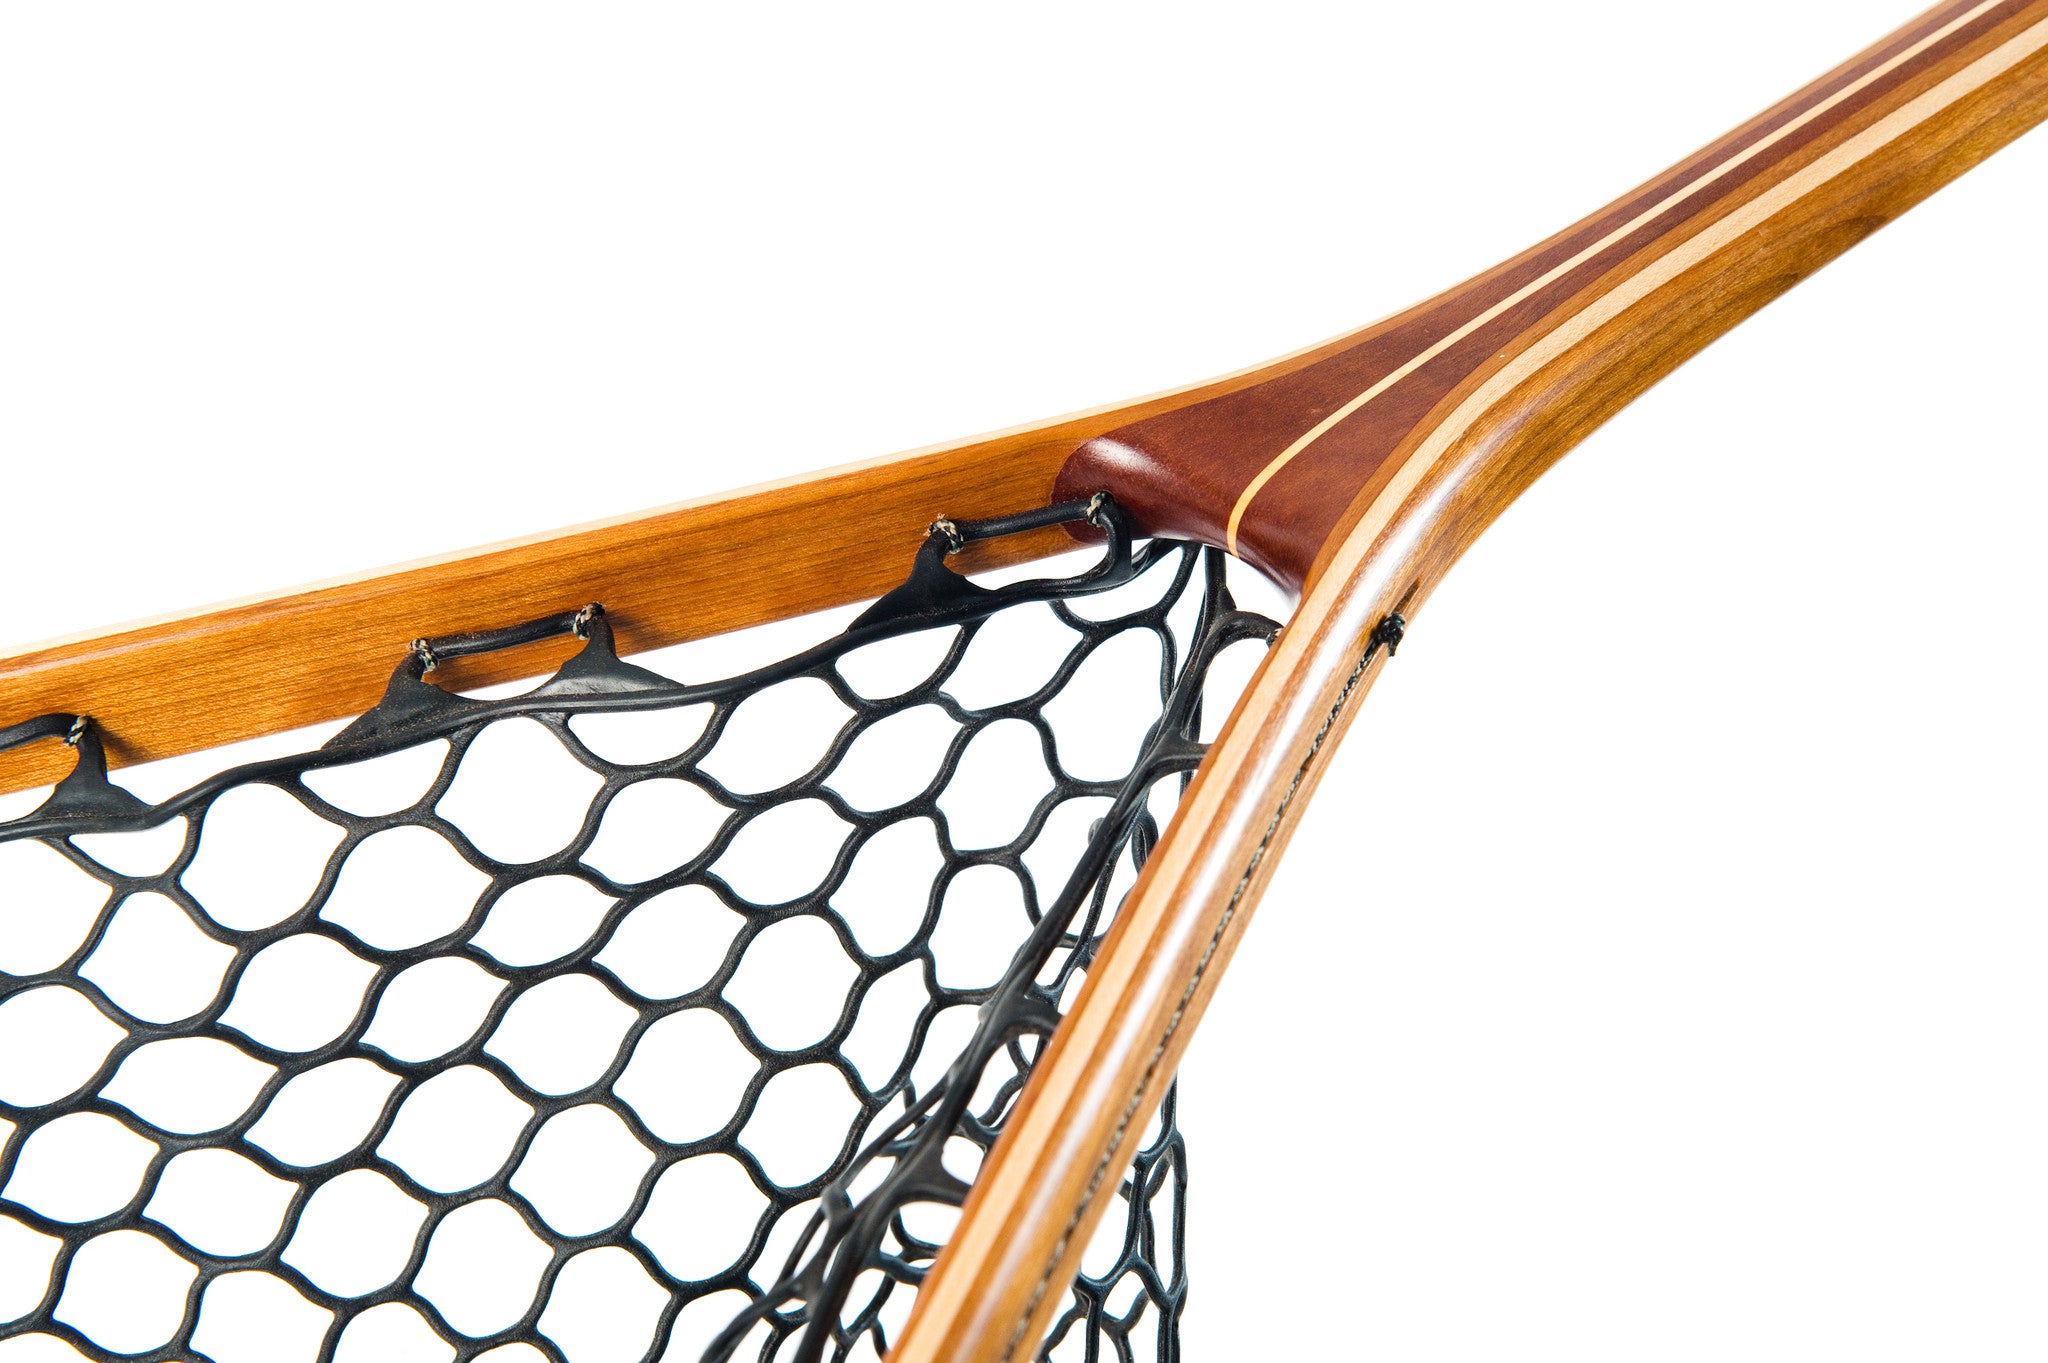 Crow river net. Tailwater Outdoors premium quality classic style fishing nets, handmade from high quality woods. Ideal for all fishing and outdoor enthusiasts.